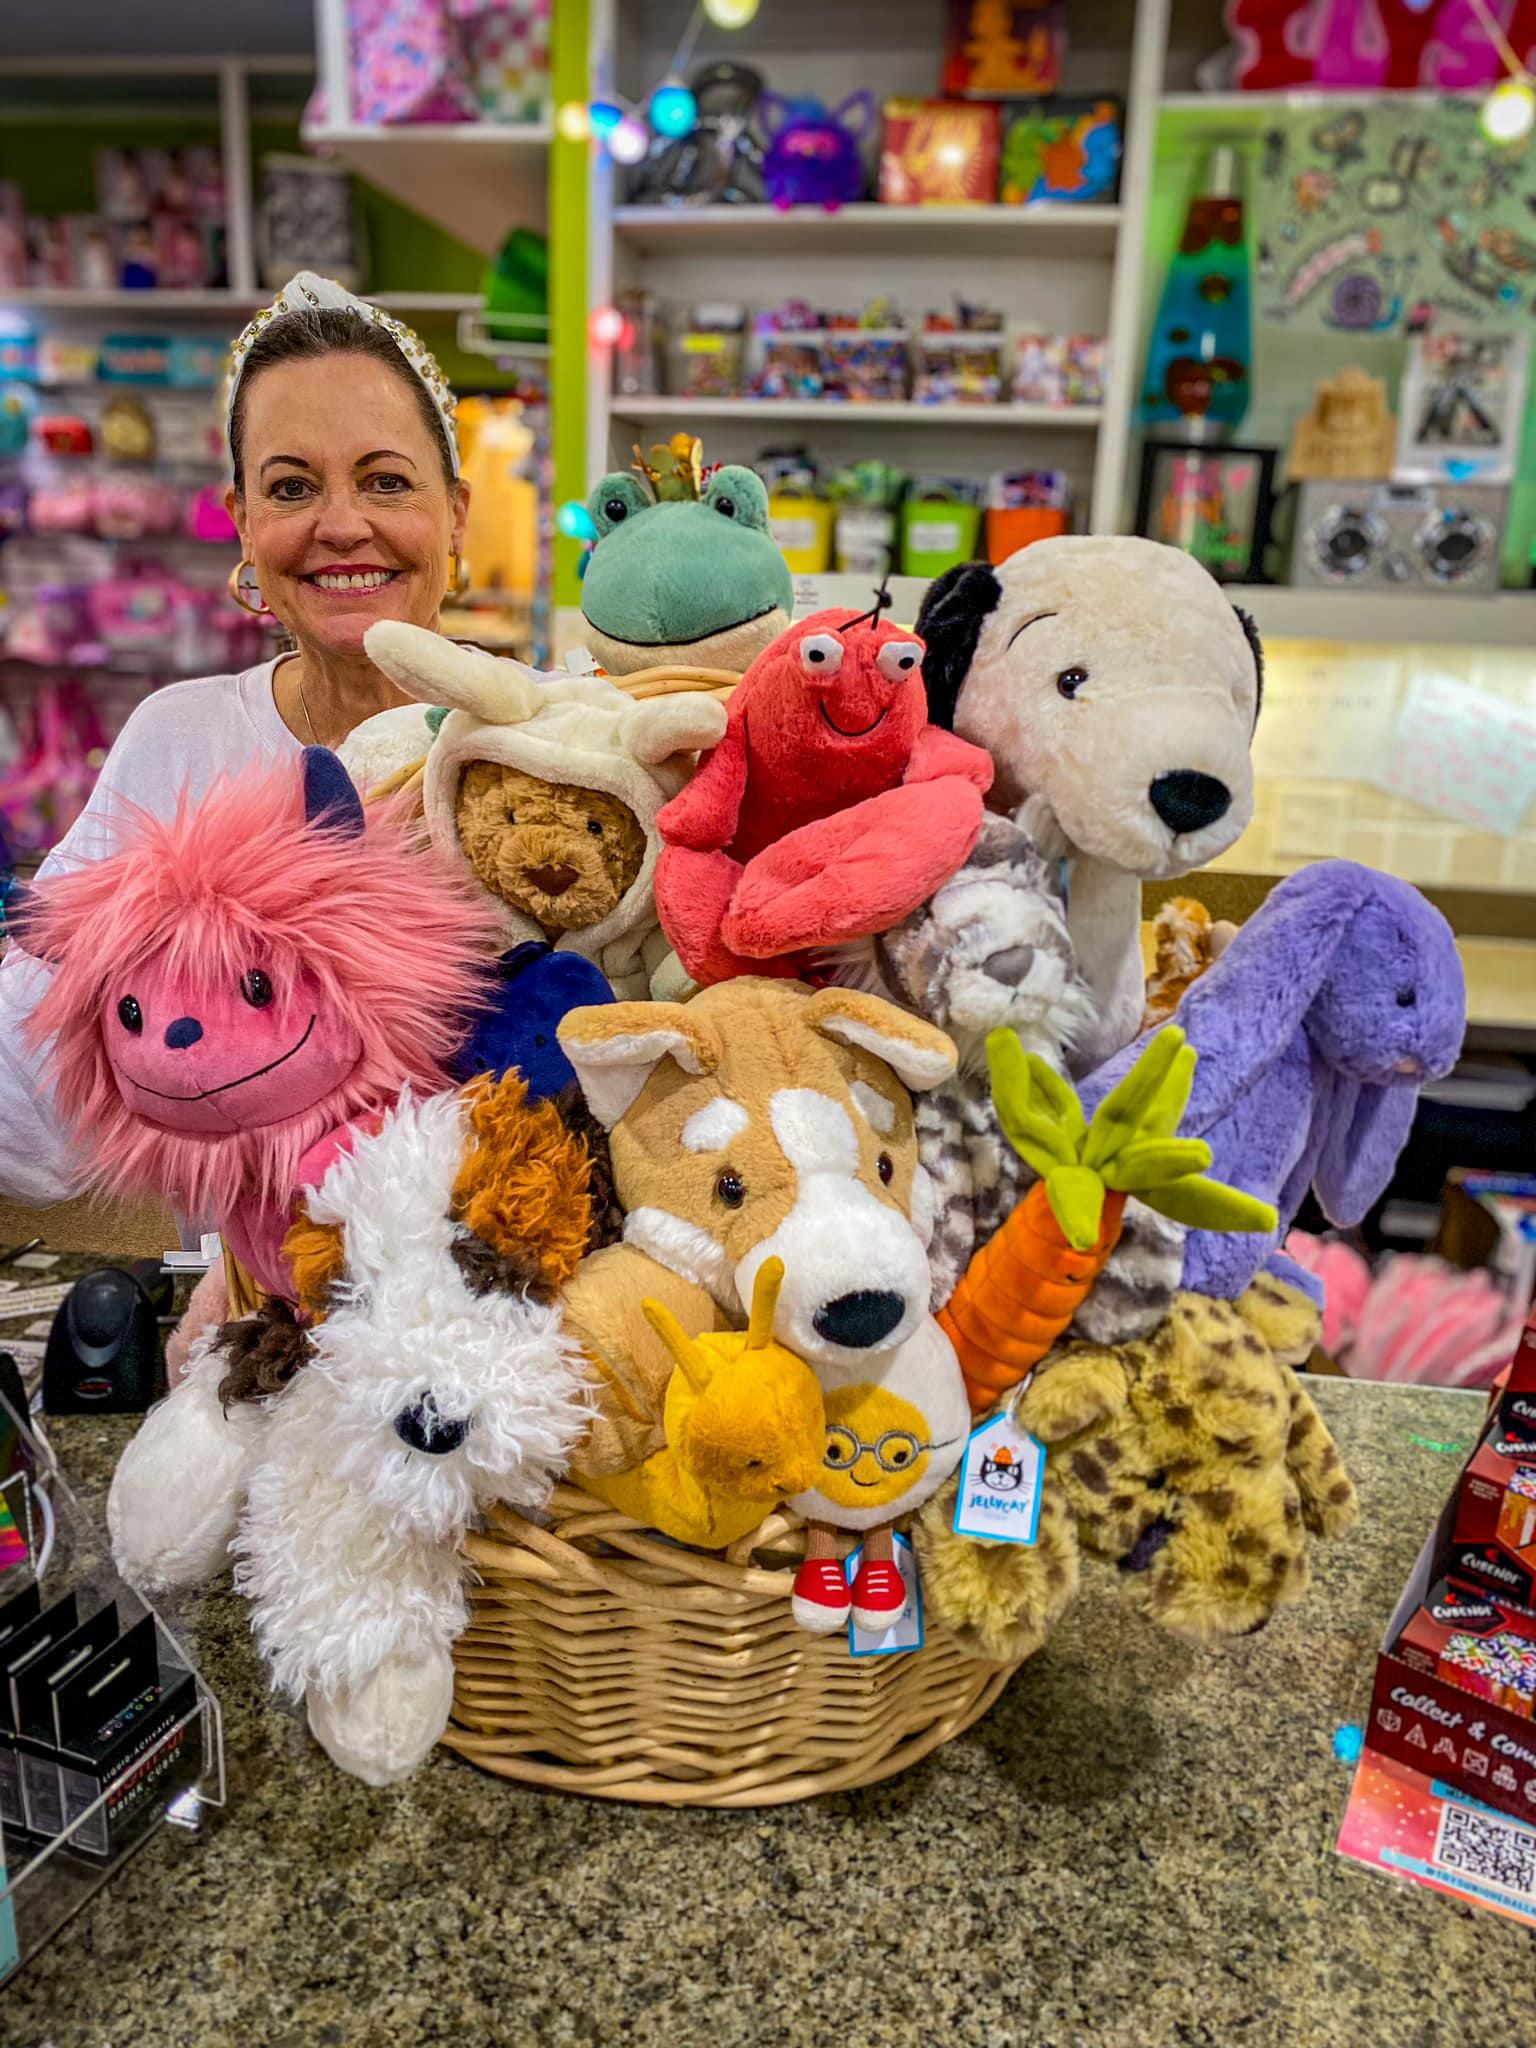 For those of you who are new to our page, welcome! We are the oldest neighborhood toy store in Dallas, located in Inwood Village directly behind the Inwood Theater. We are dedicated to serving families in our community and beyond with top-quality toys, boundless creativity, and making cherished memories everyday! 💖